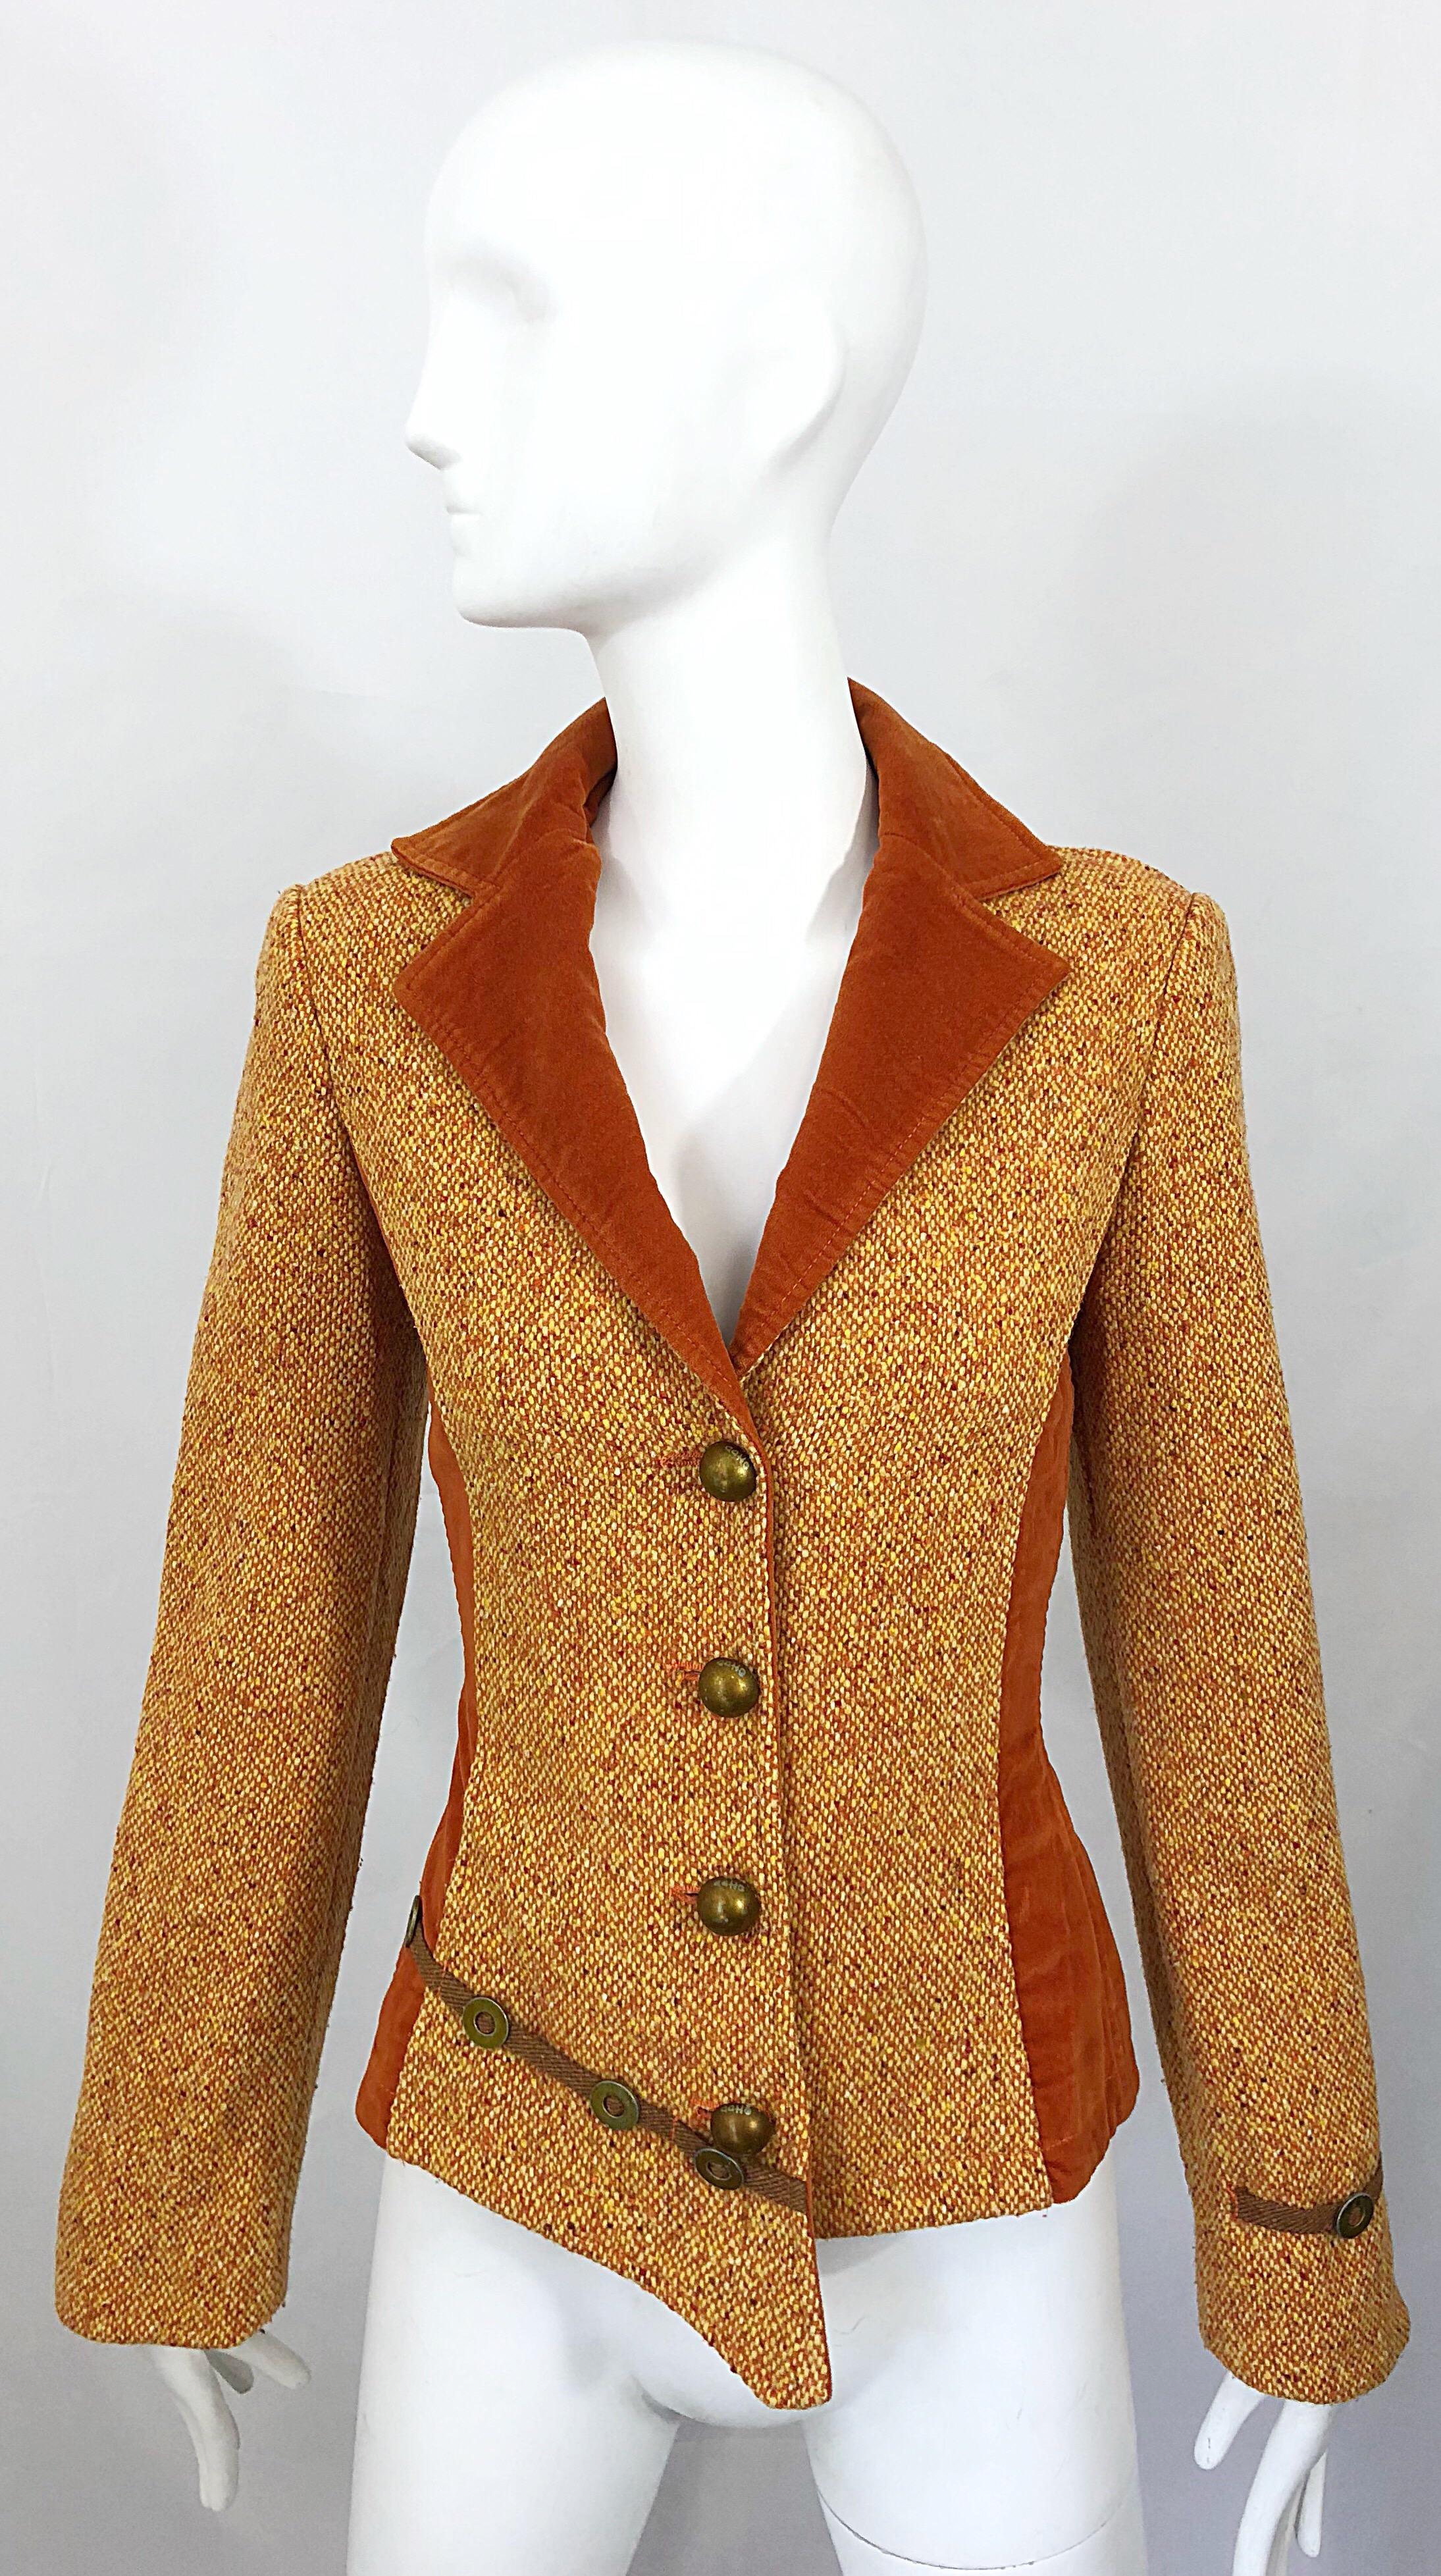 Rare and Stylish late 1990s vintage OHDD Italian made Avant Garde asymmetrical blazer jacket! Features burnt orange velvet accents throughout, with a marigold and orange soft virgin wool. Asymmetrical hemline with brown suede buckles. Fully lined in